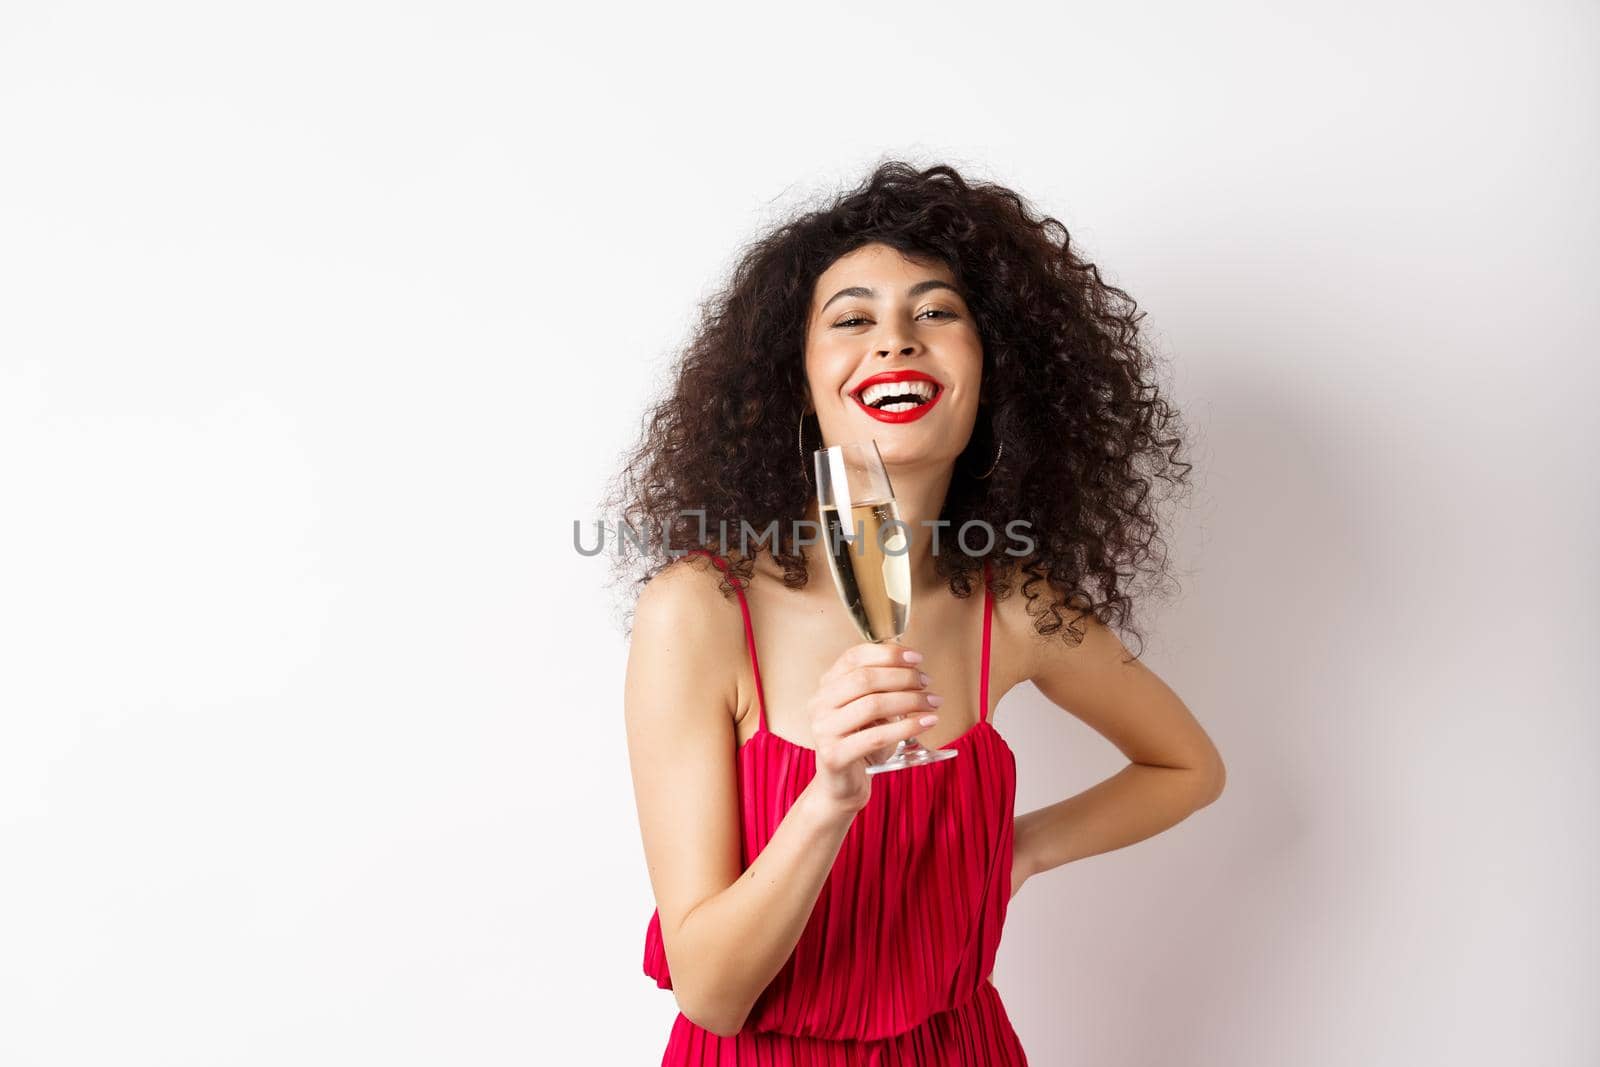 Cheerful elegant woman with dark curly hair, wearing party dress, celebrating anniversary on valentines day, drinking champagne from glass and smiling at camera, white background.